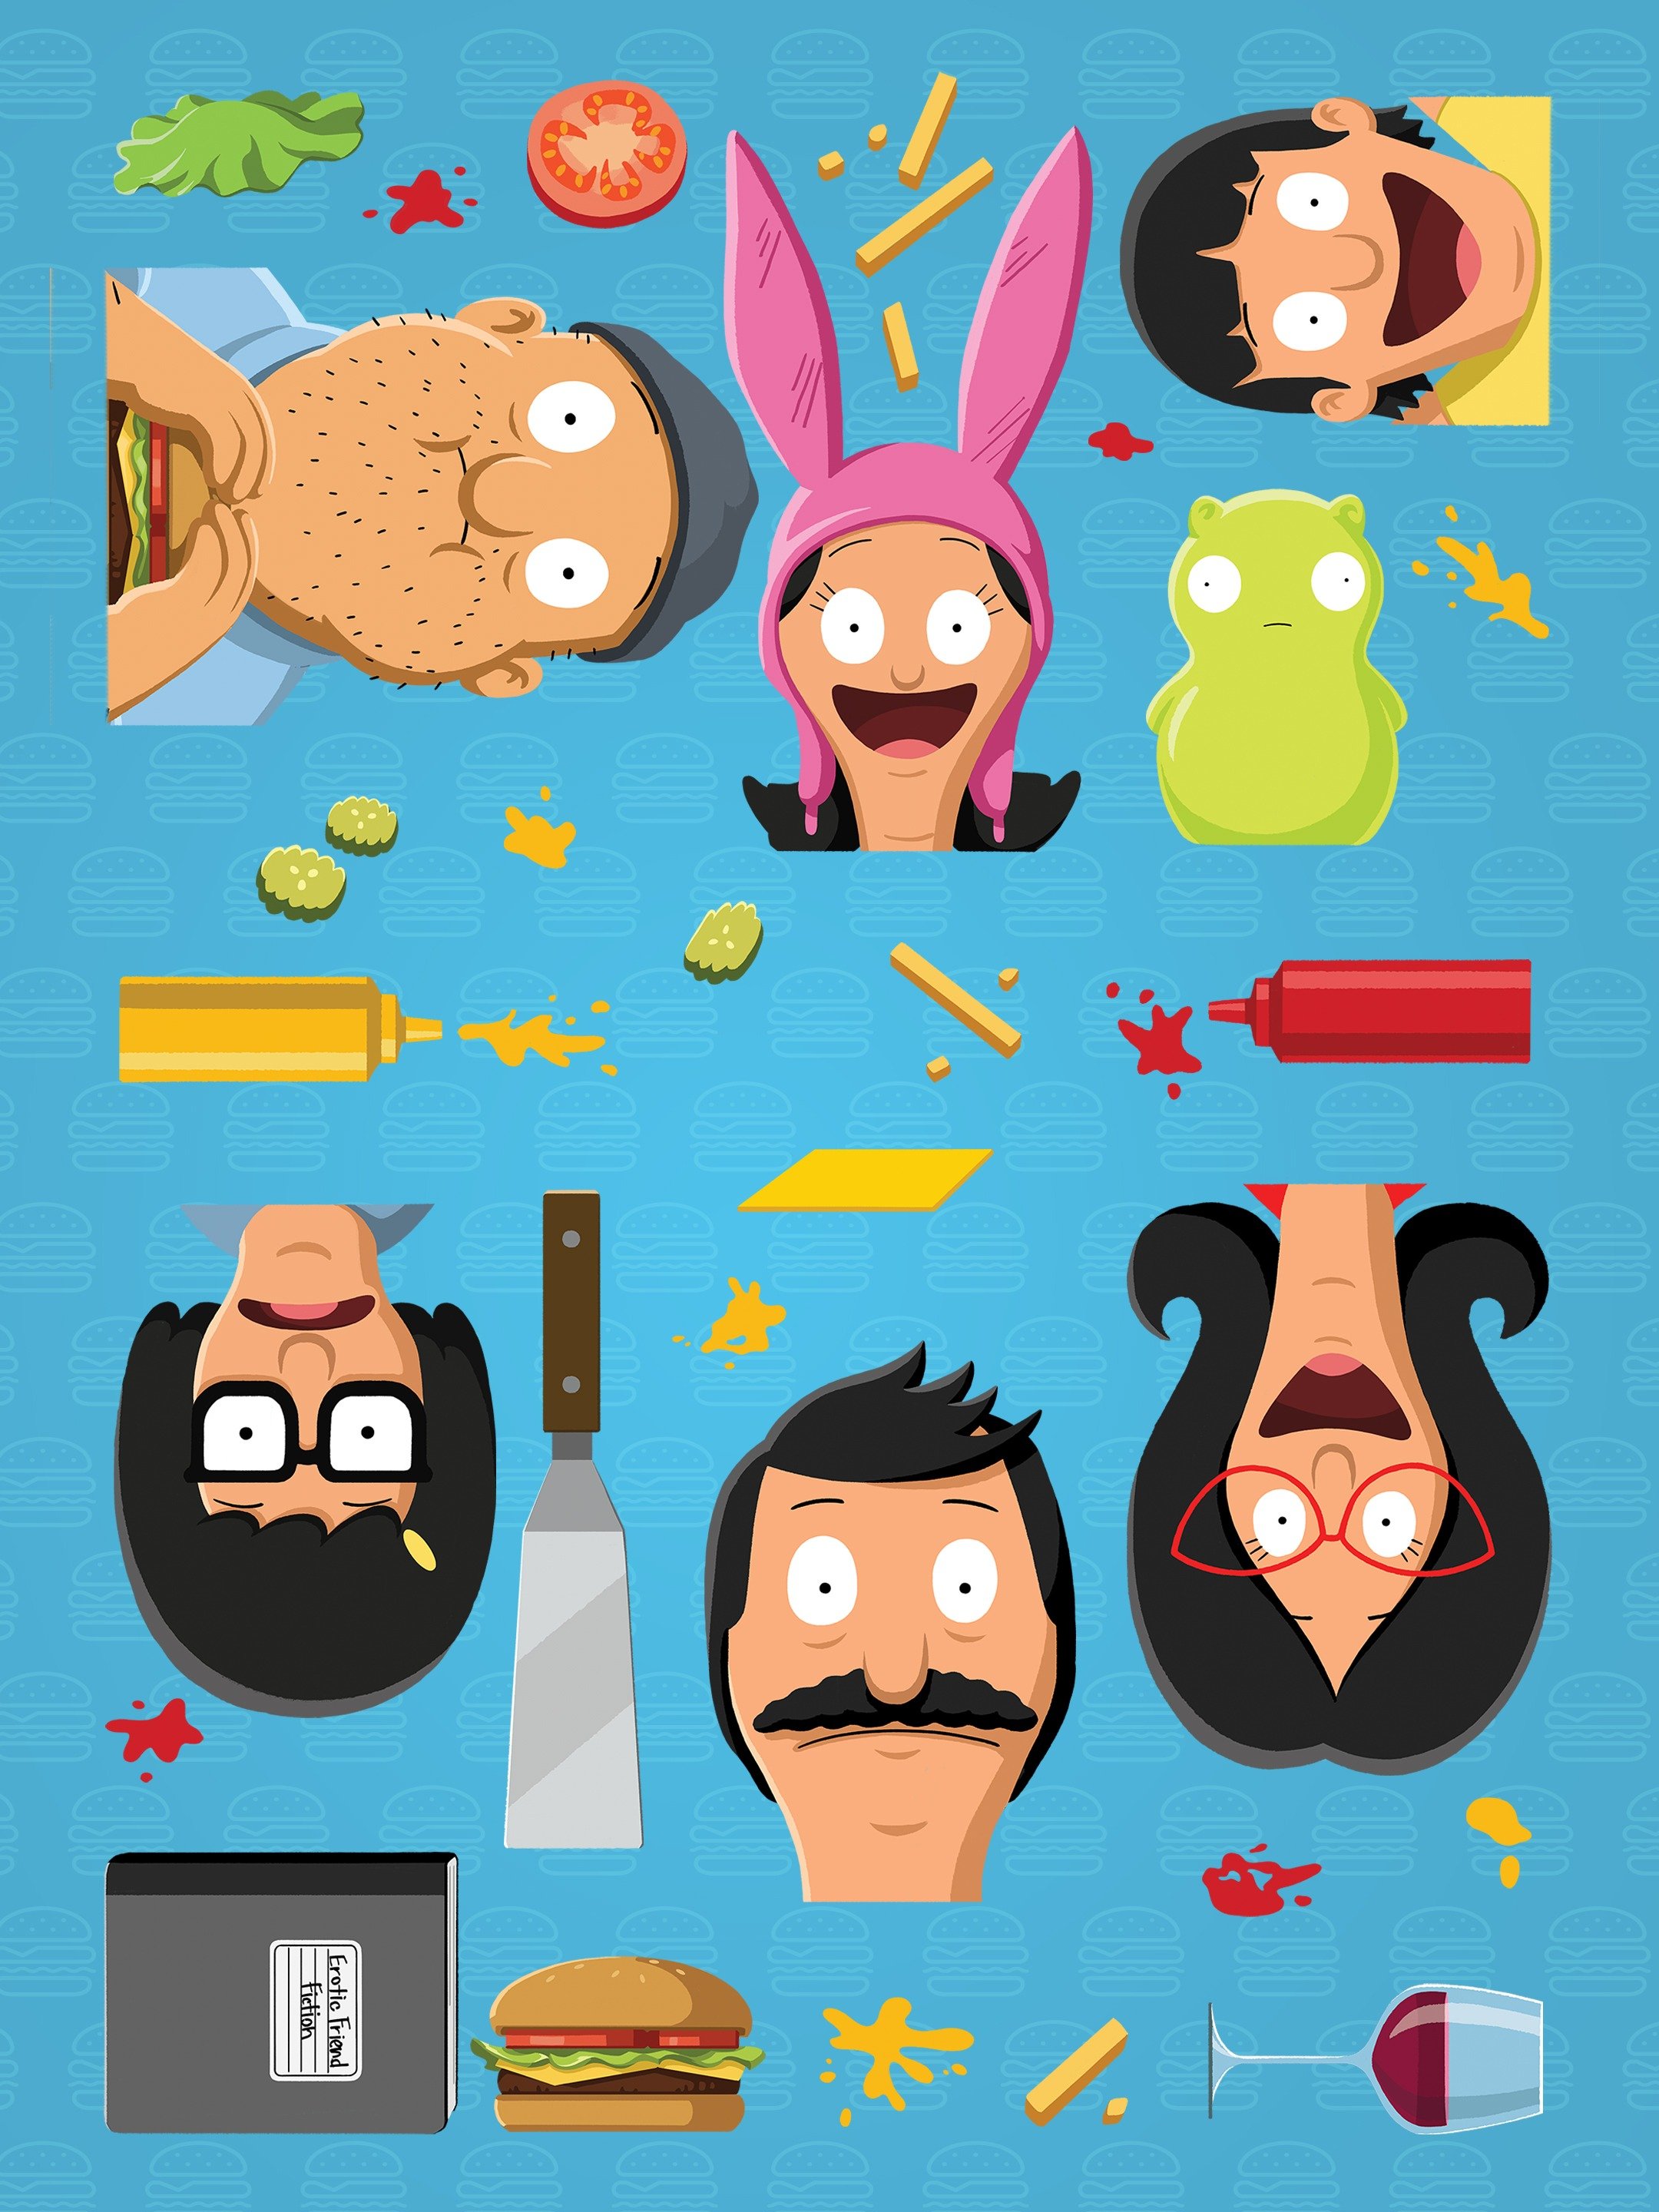 1357790 The Bobs Burgers Movie HD  Rare Gallery HD Wallpapers